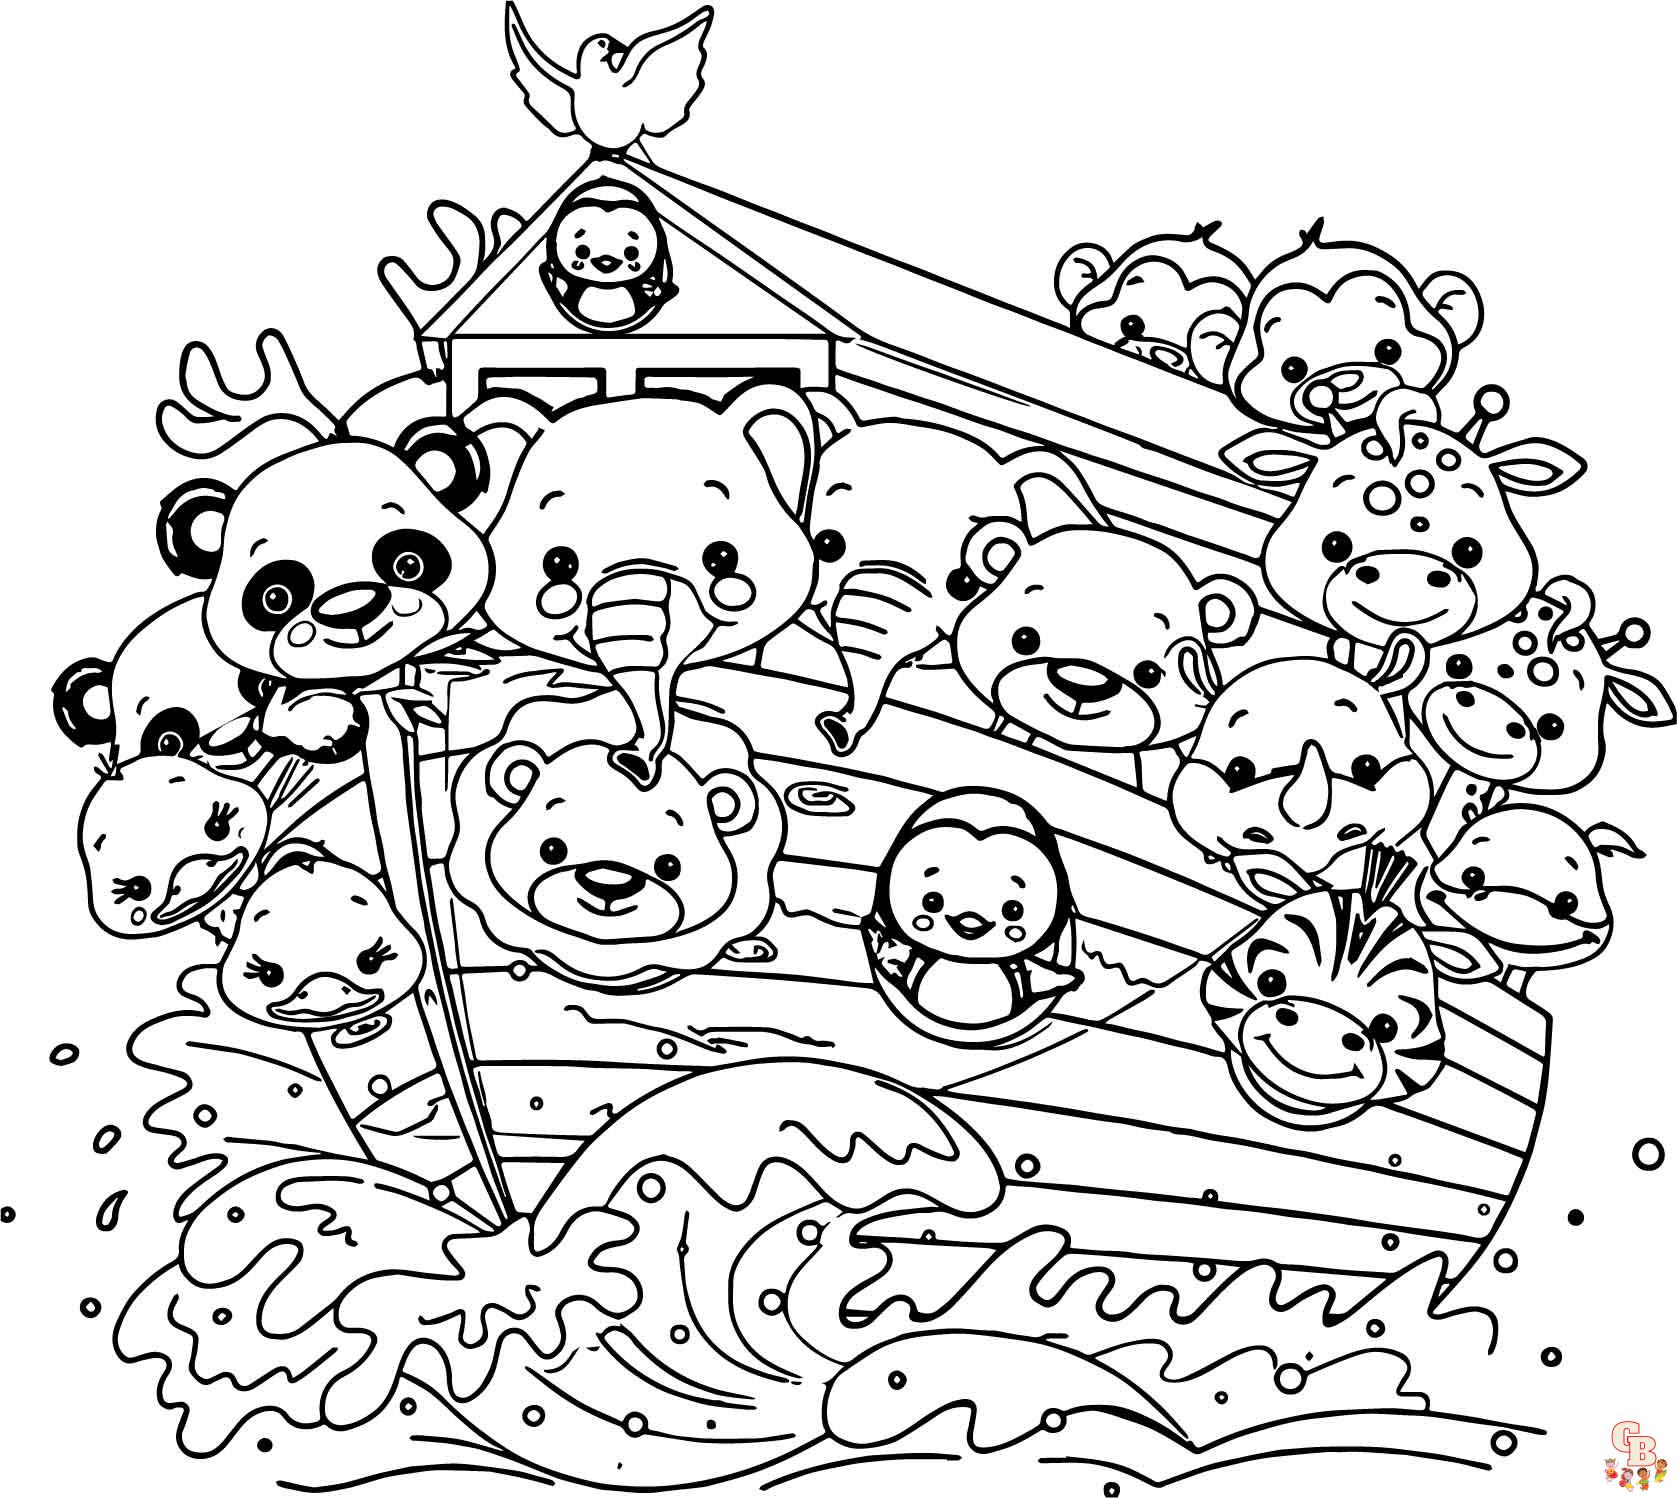 Noahs Ark Animals Coloring Pages 1